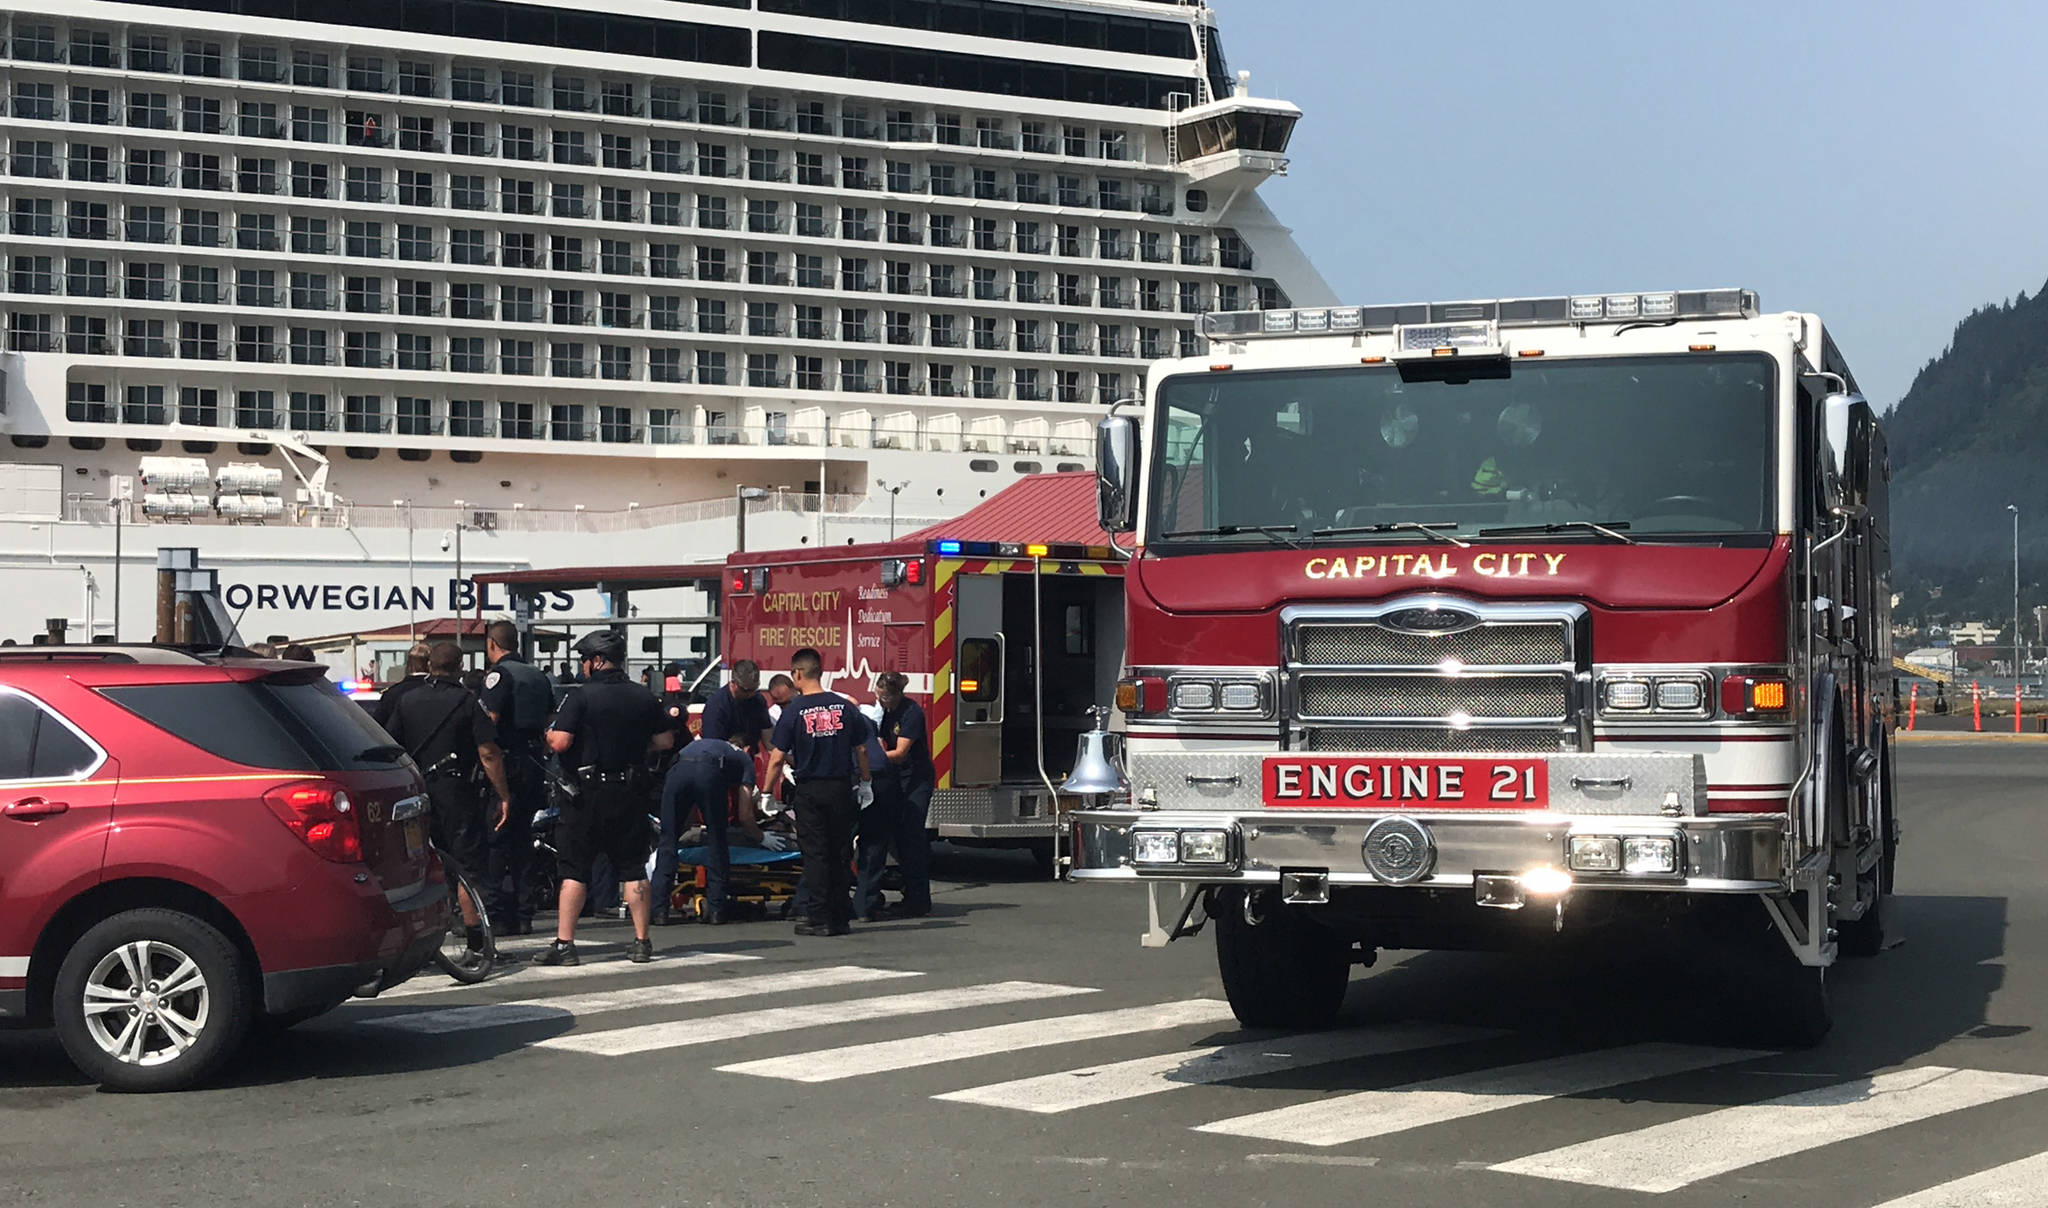 Capital City Fire/Rescue responders prepare to load a man into an ambulance after he was hit by a bus at the AJ Dock on Tuesday, July 24, 2018. The man’s injuries were minor and he was set to be released from the hospital later in the day. (Alex McCarthy | Juneau Empire)